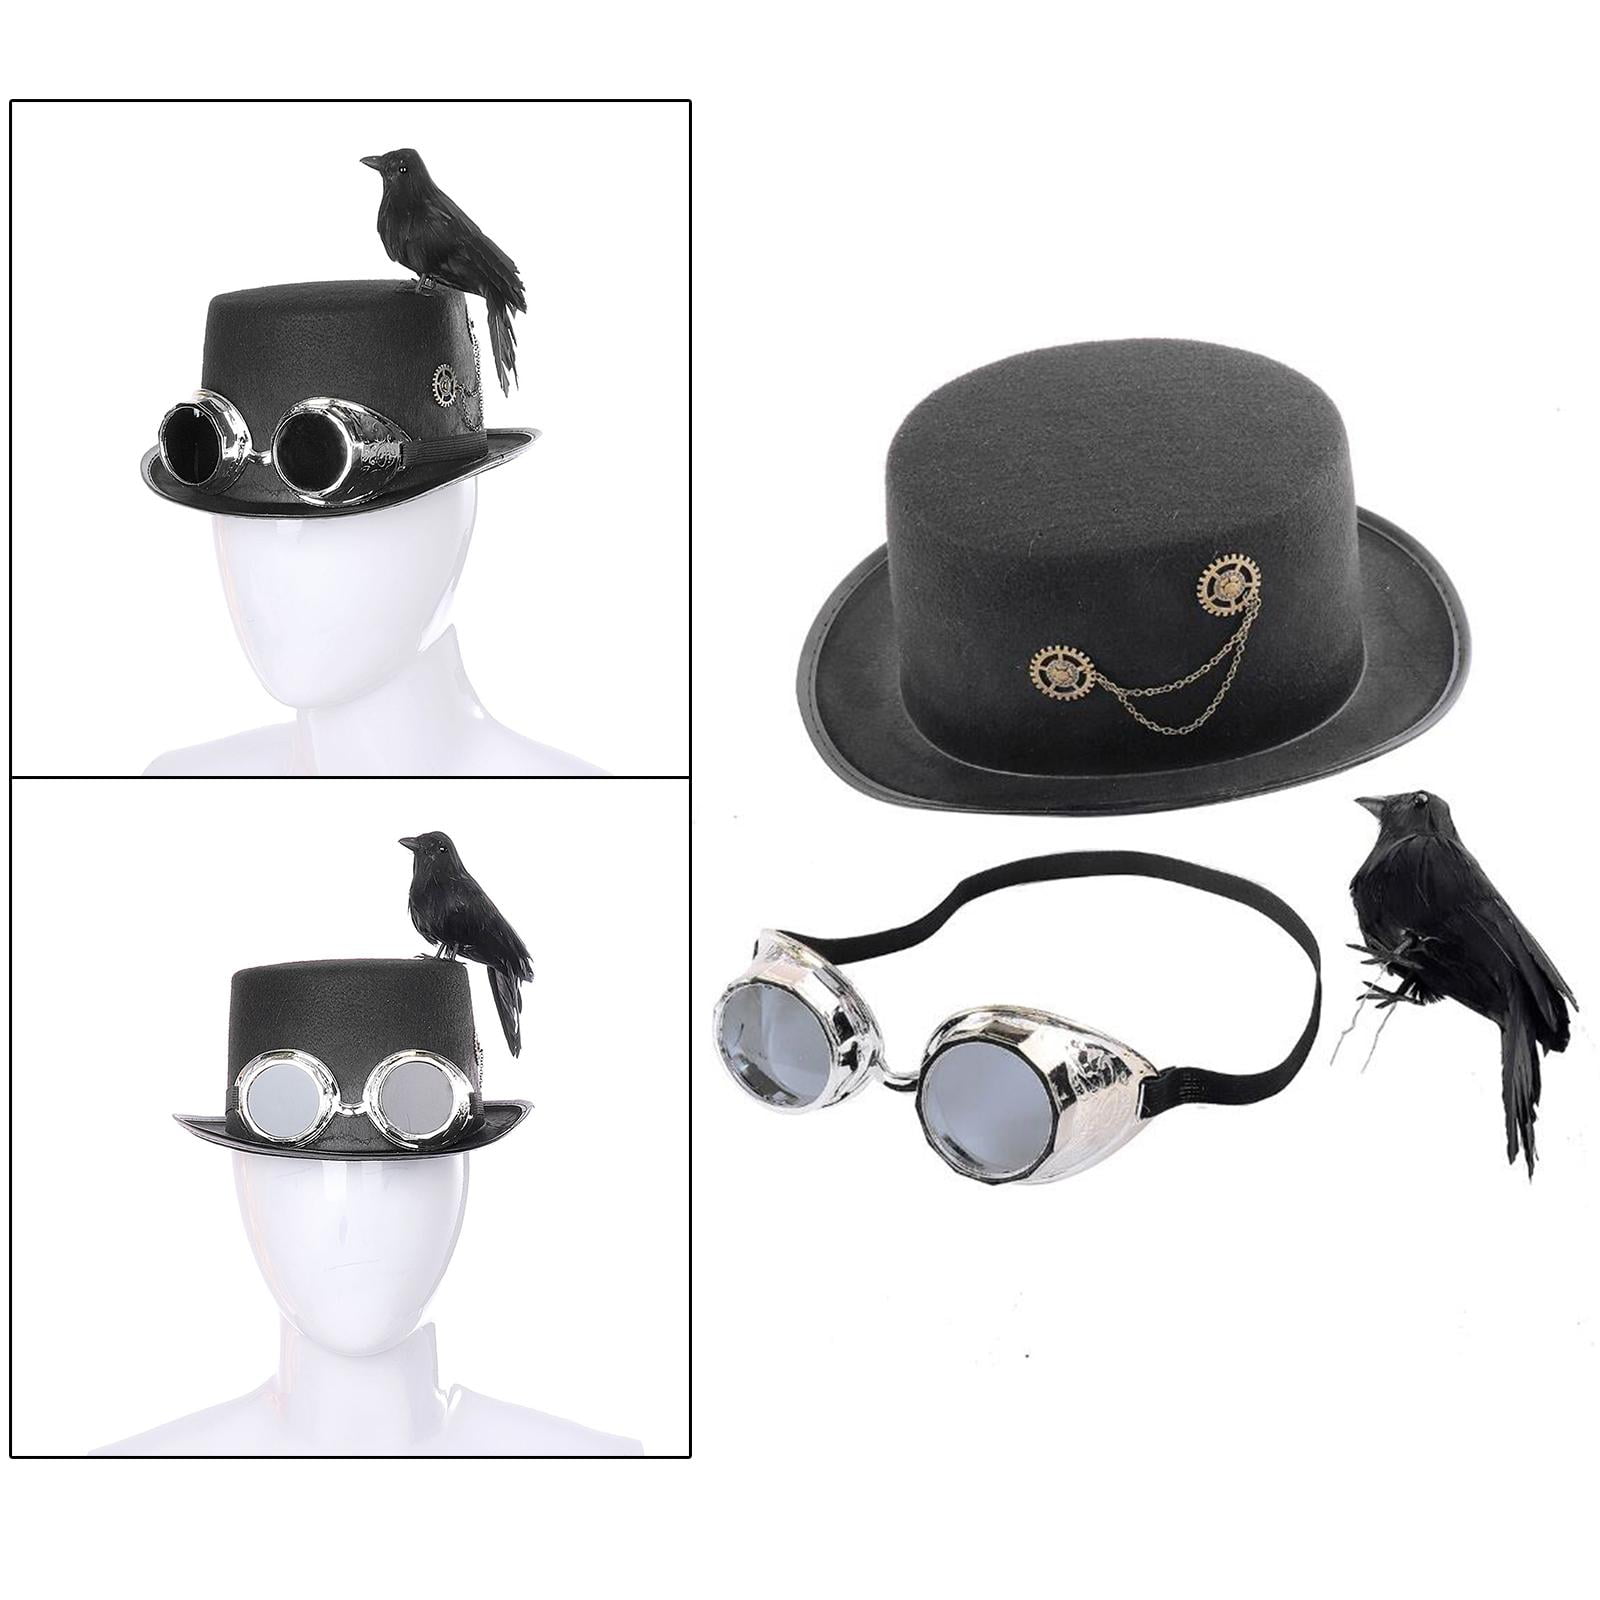 Unisex Steampunk Top Hats Halloween Costume Hat with Goggles 